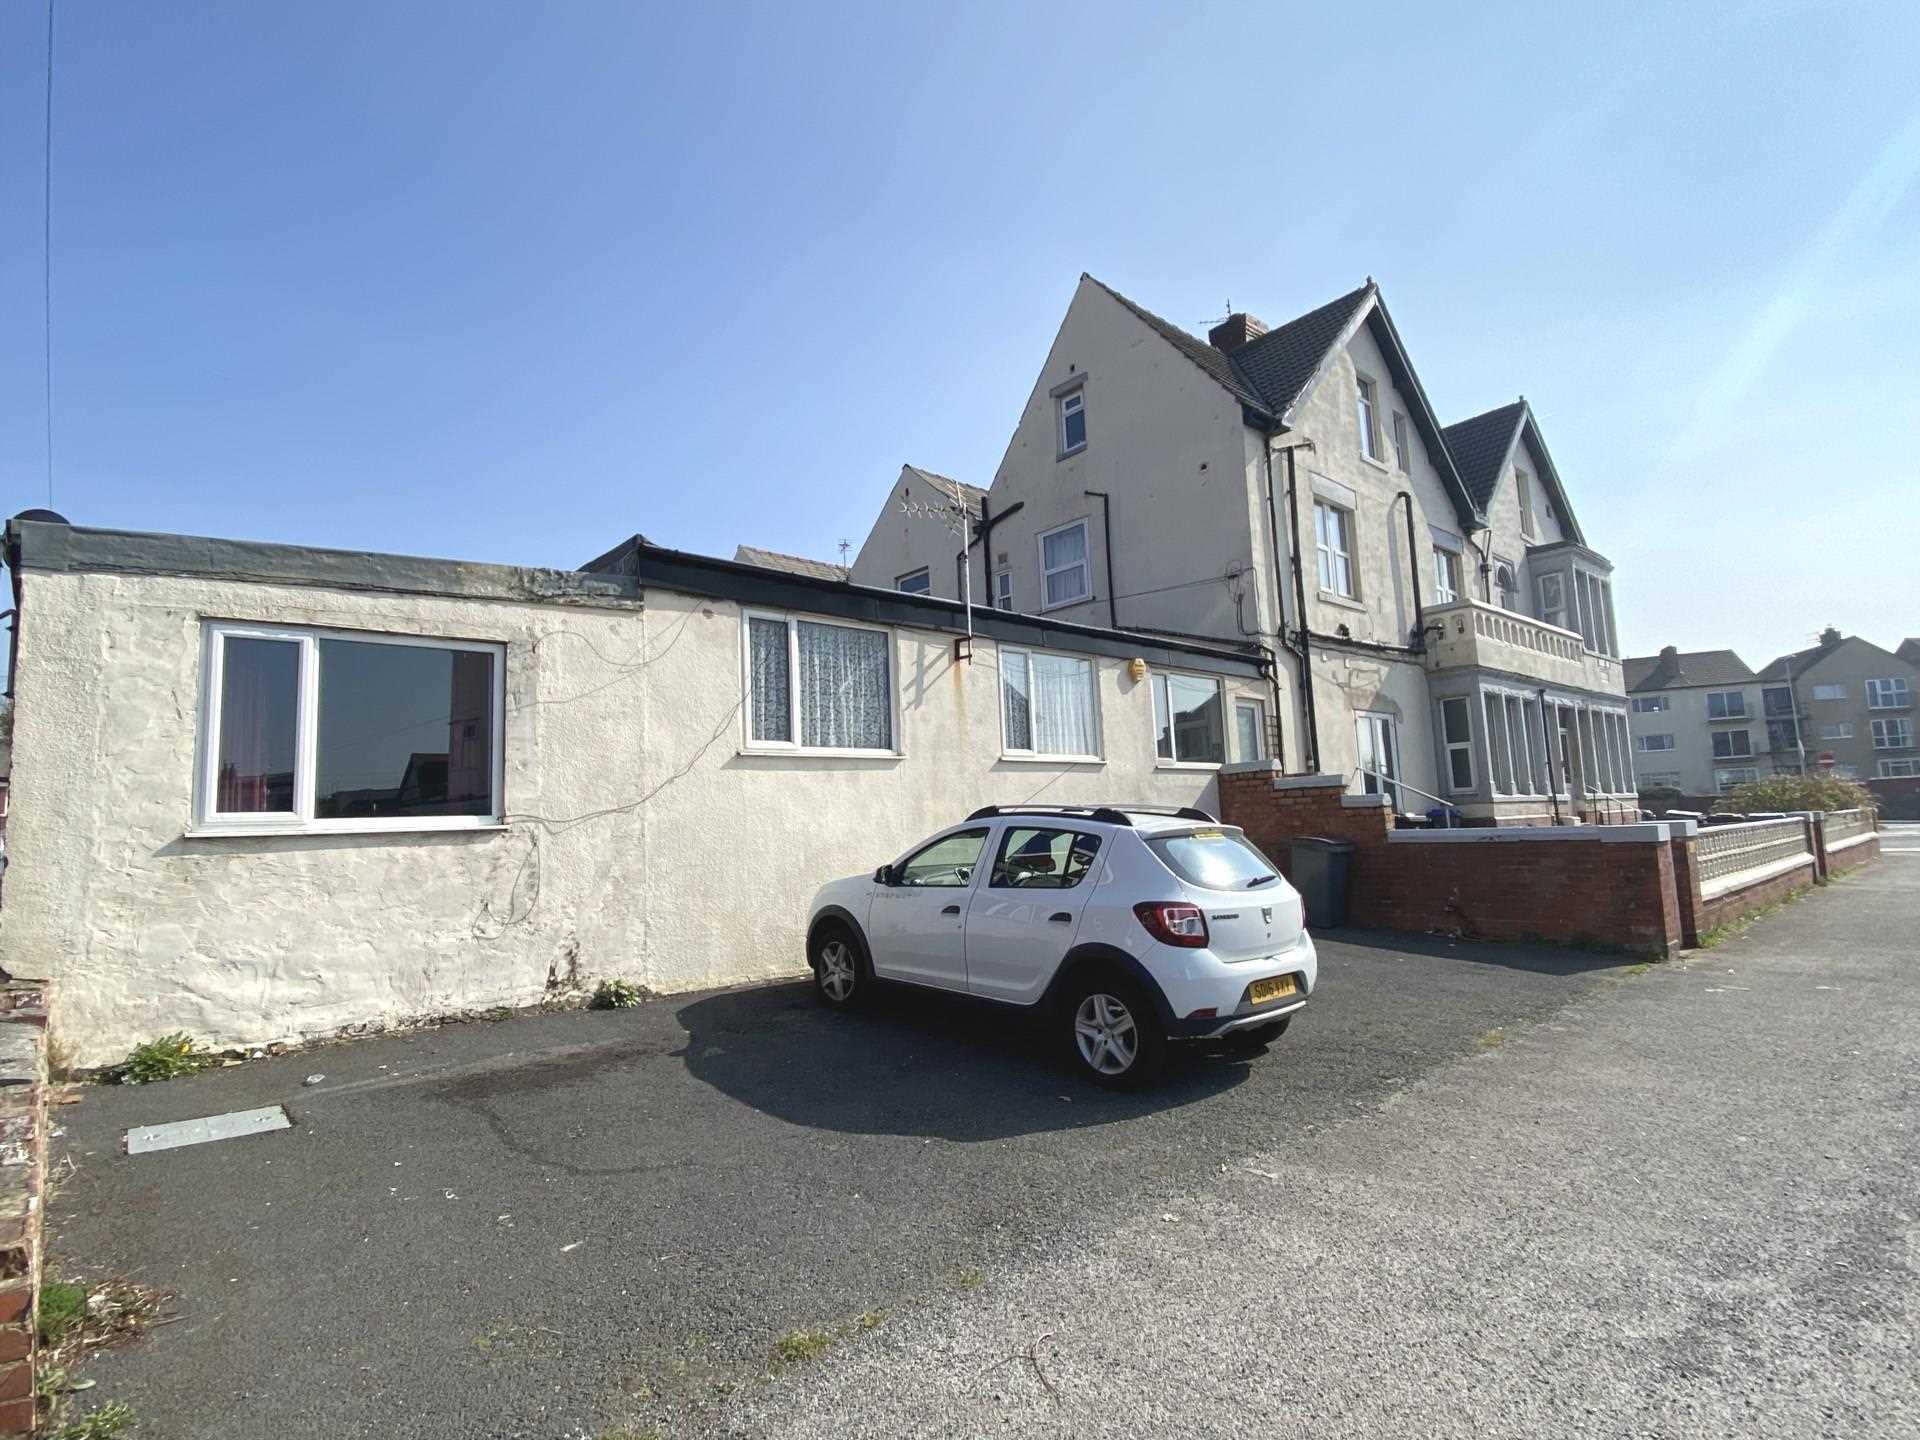 2 bed Flat for rent in Blackpool. From Christie King Estate Agents